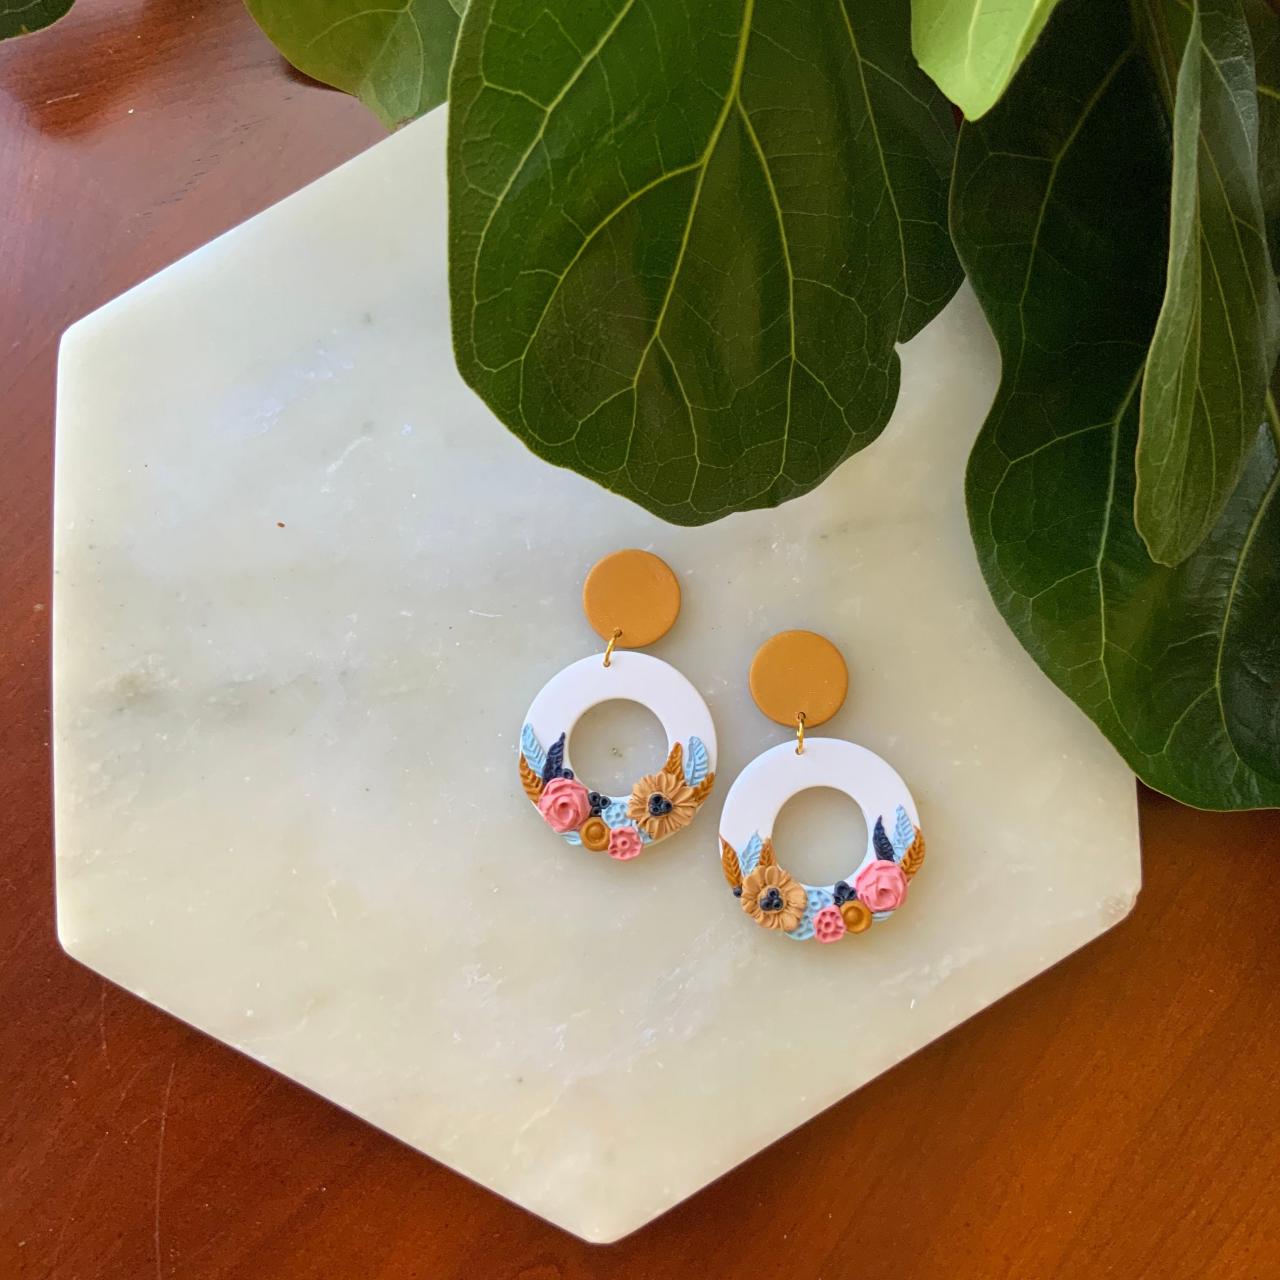 Floral Polymerclay Earrings